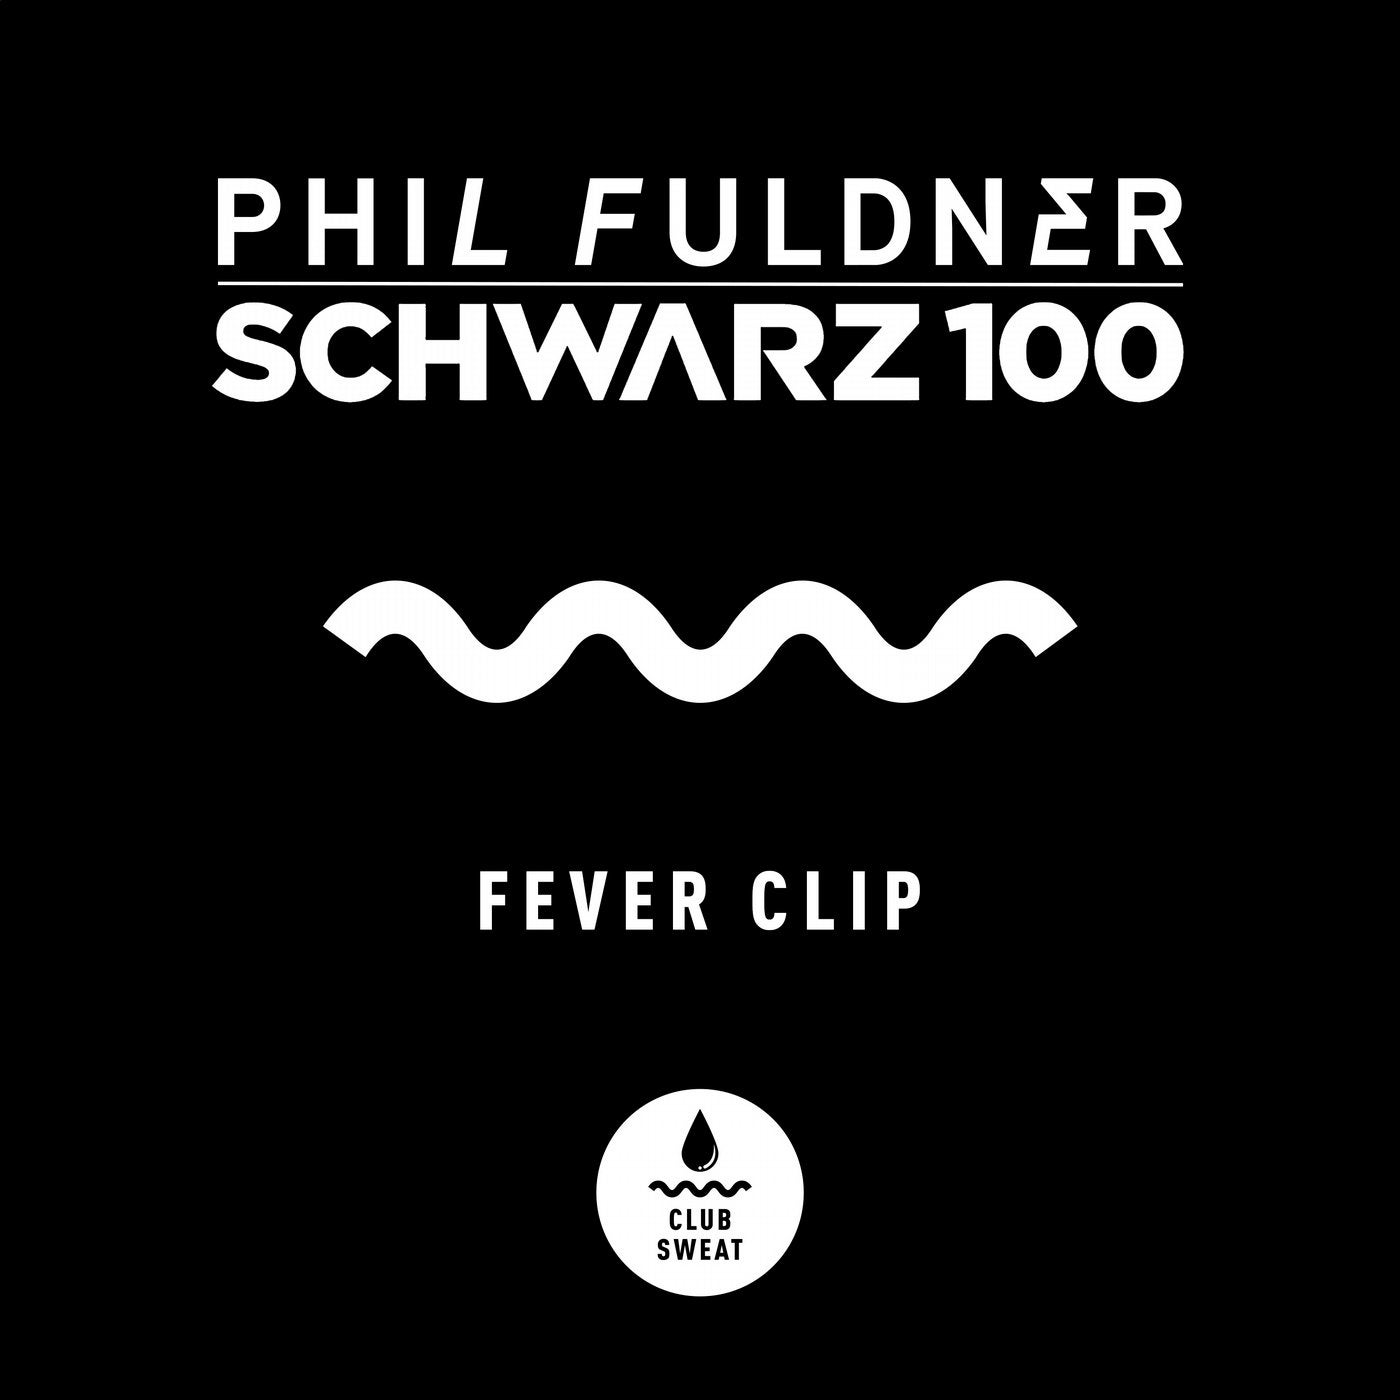 Fever Clip (Extended Mix)